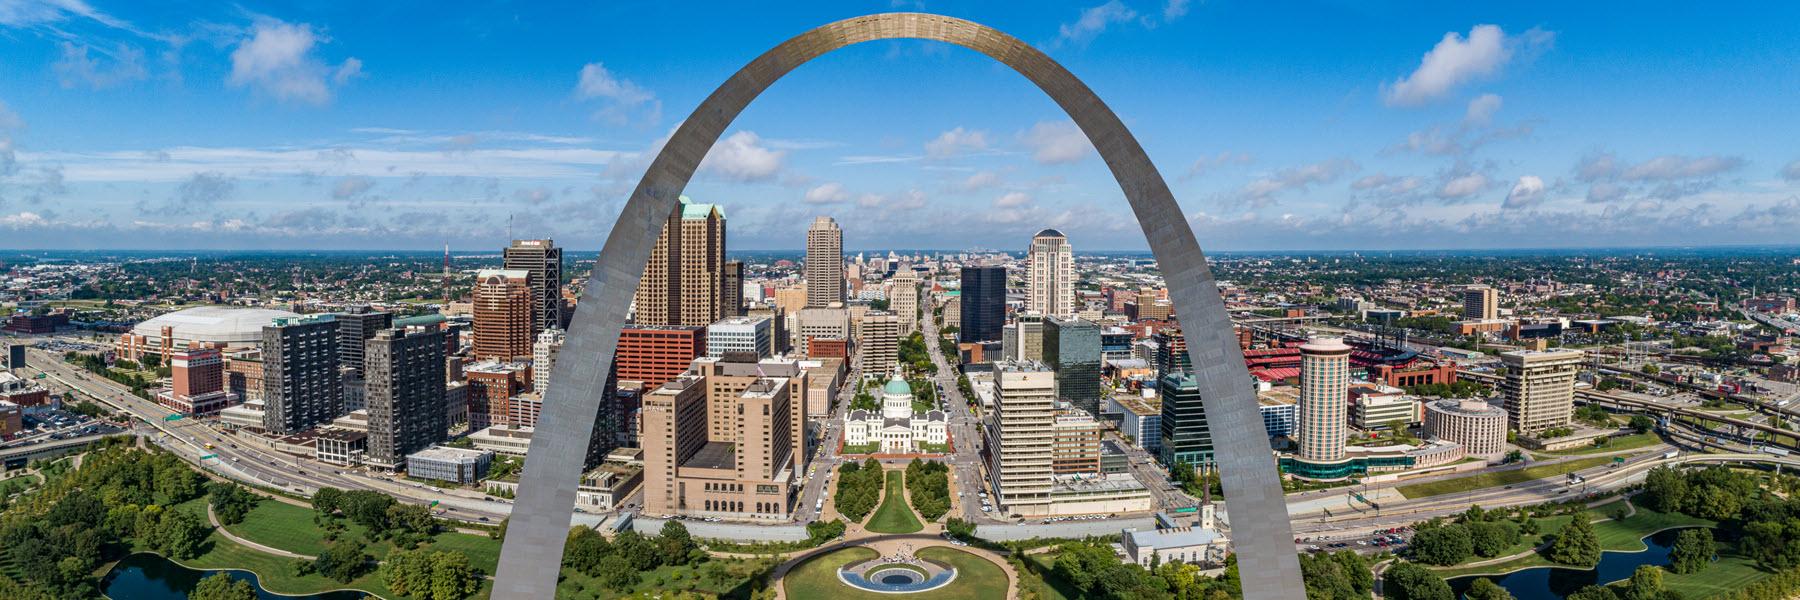 The Gateway Arch rises above the downtown St. Louis Skyline.